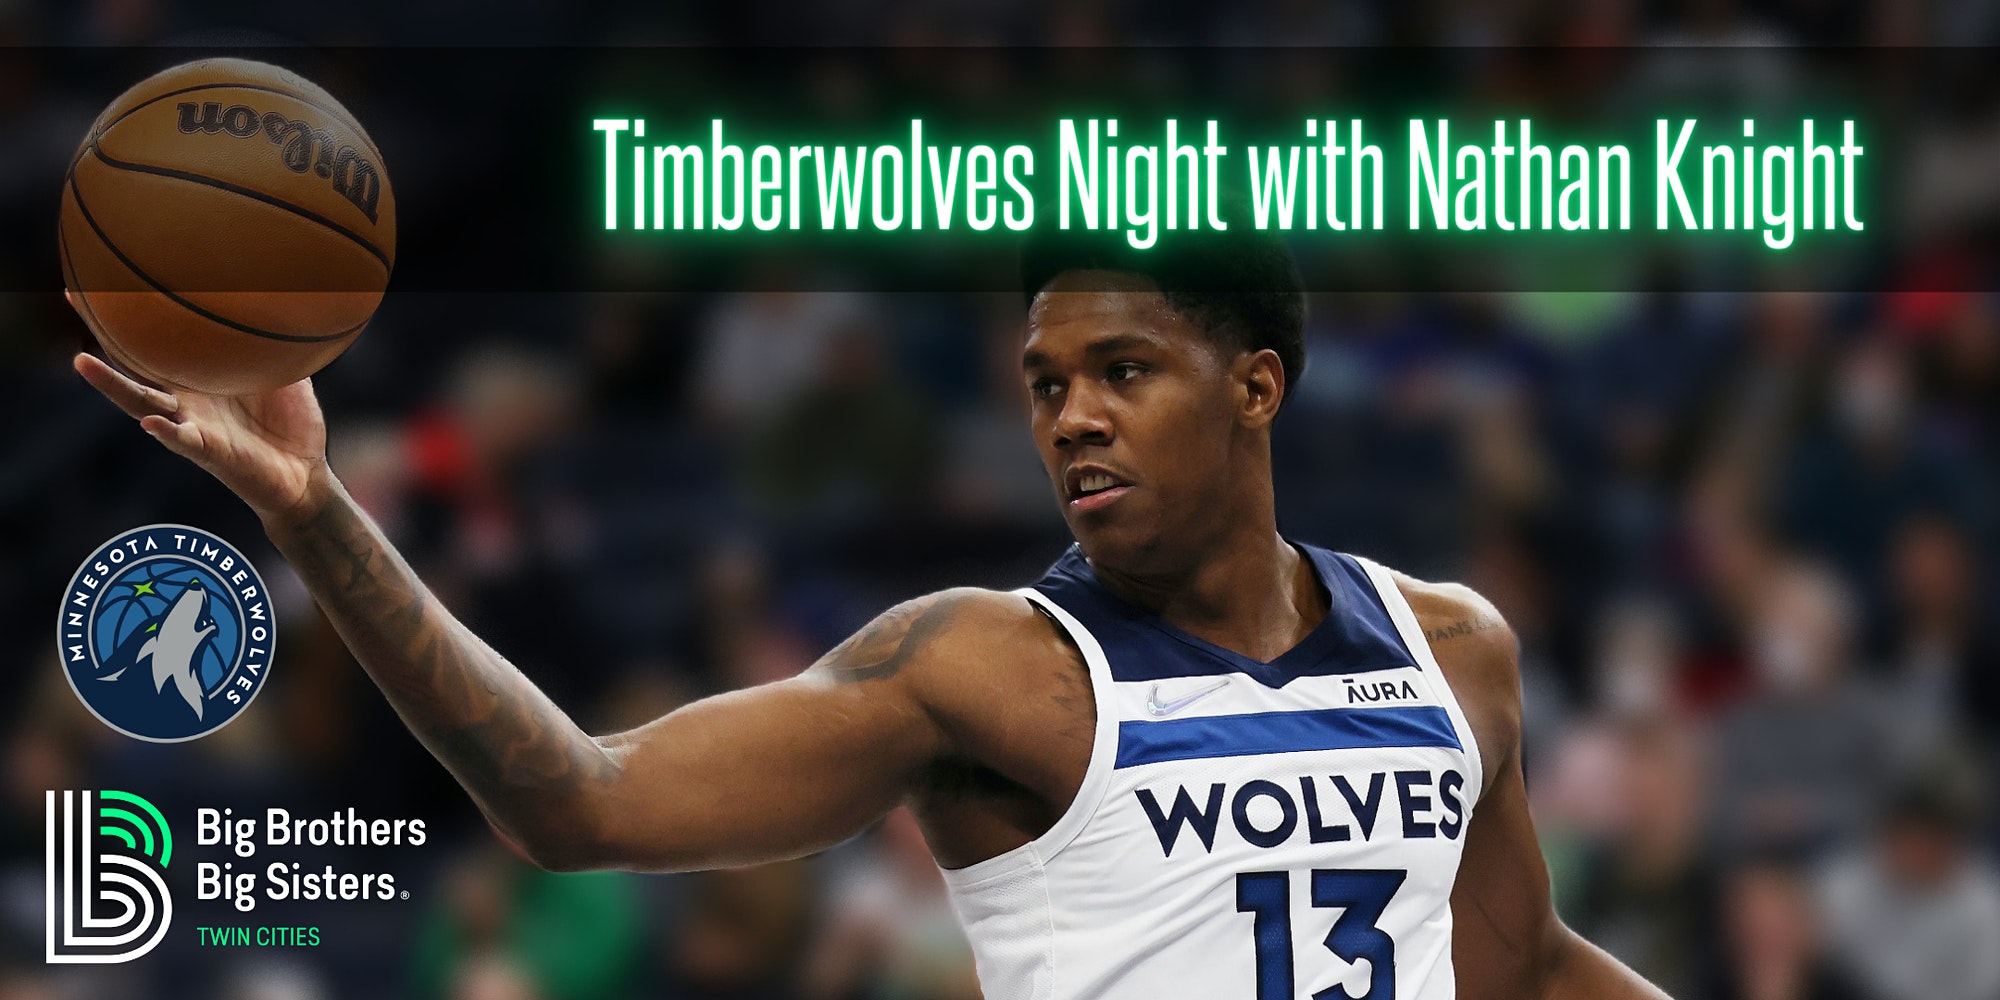 Timberwolves Night with Nathan Knight - BBBS Twin Cities